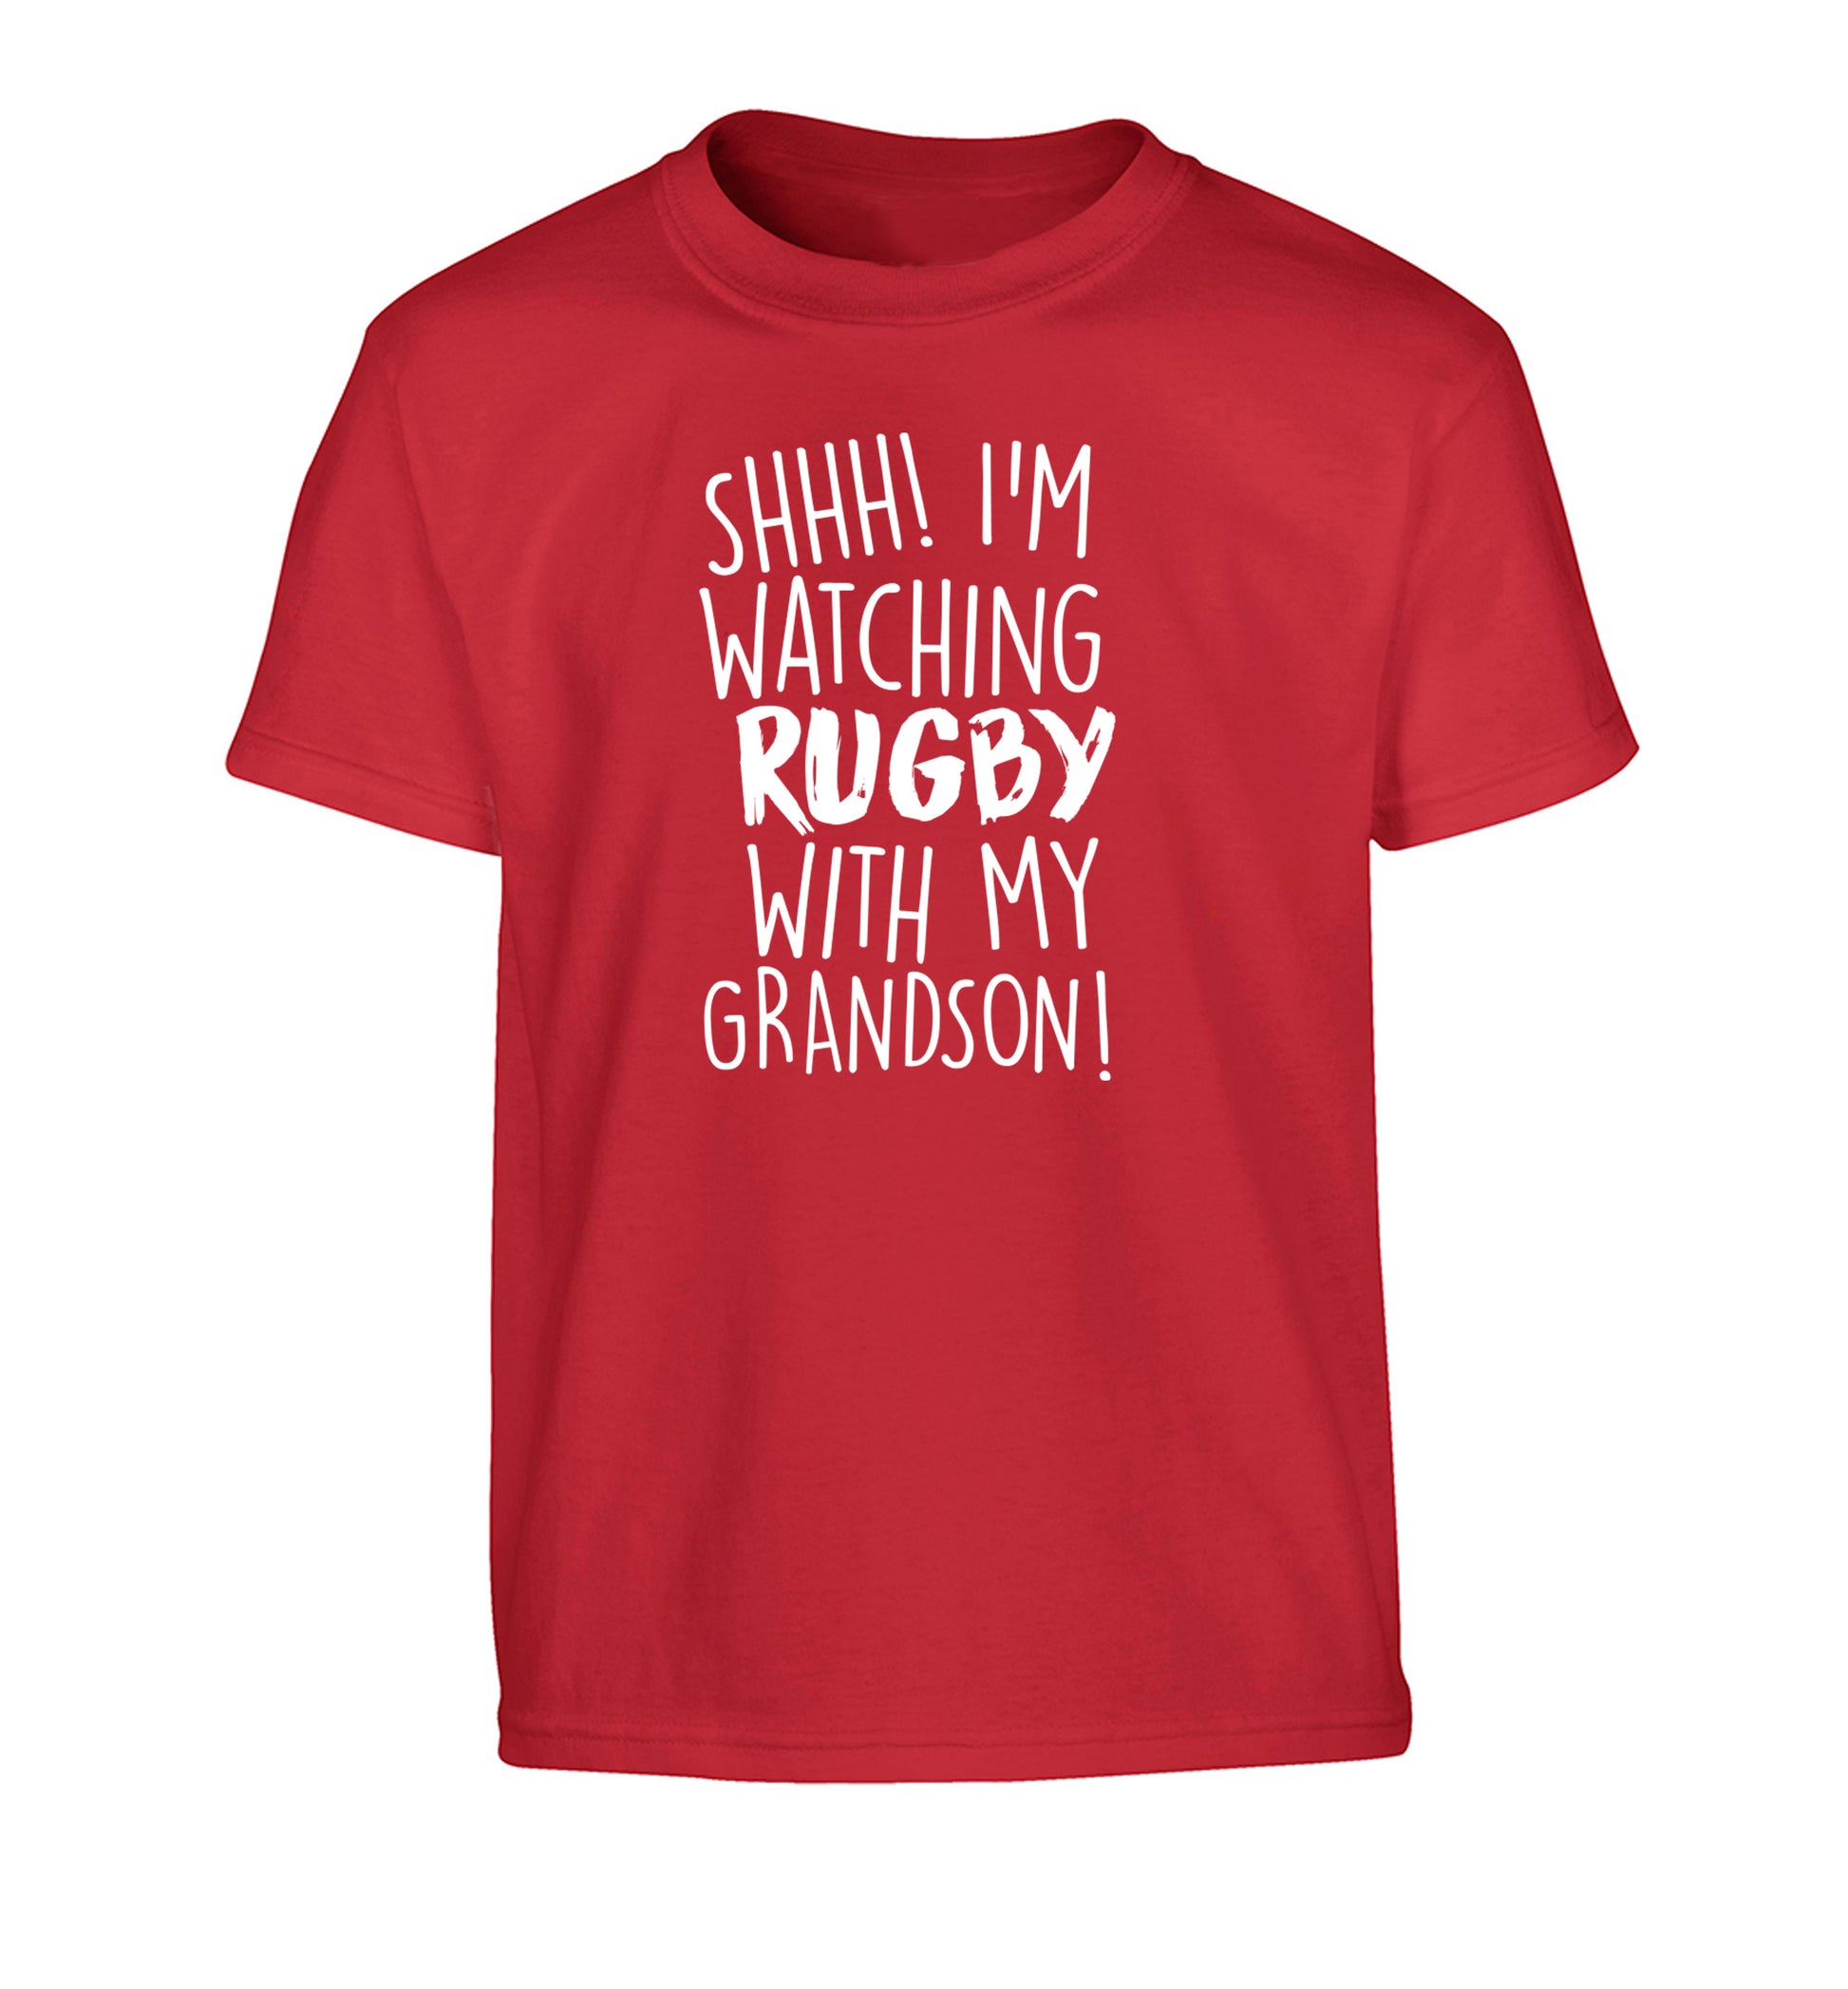 Shh I'm watching rugby with my grandson Children's red Tshirt 12-13 Years